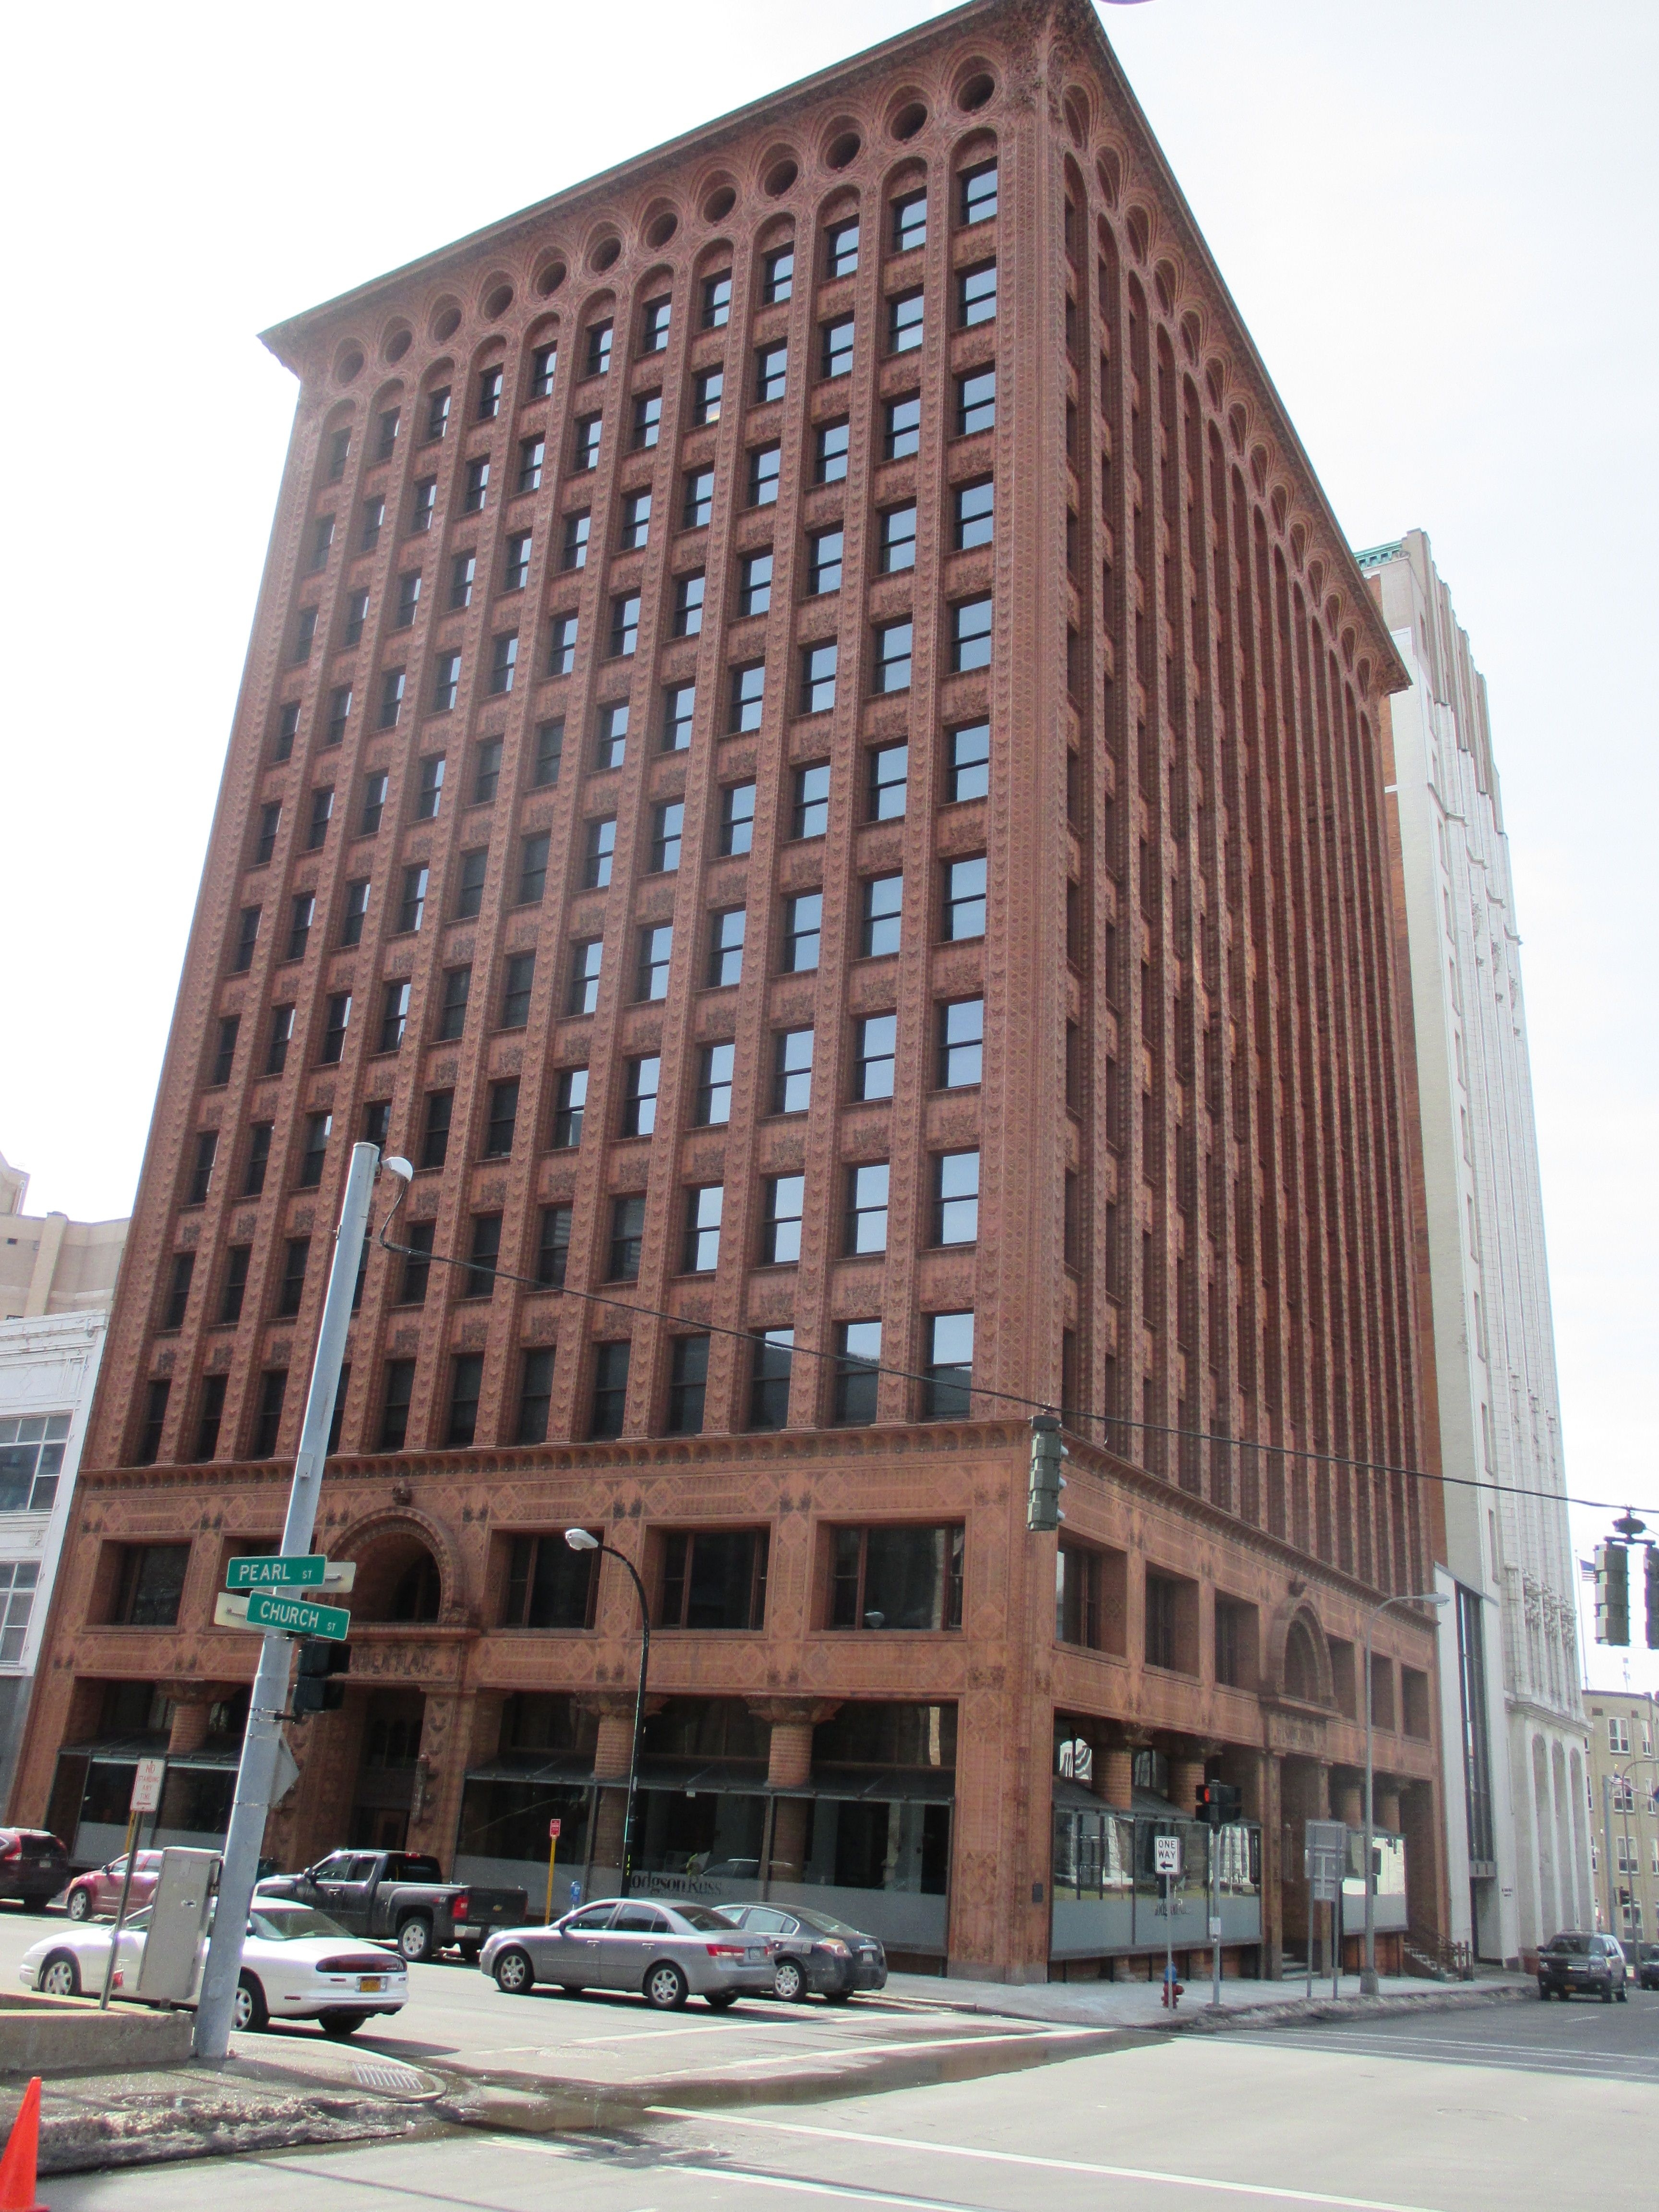 Prudential (Guaranty) Building & Marker